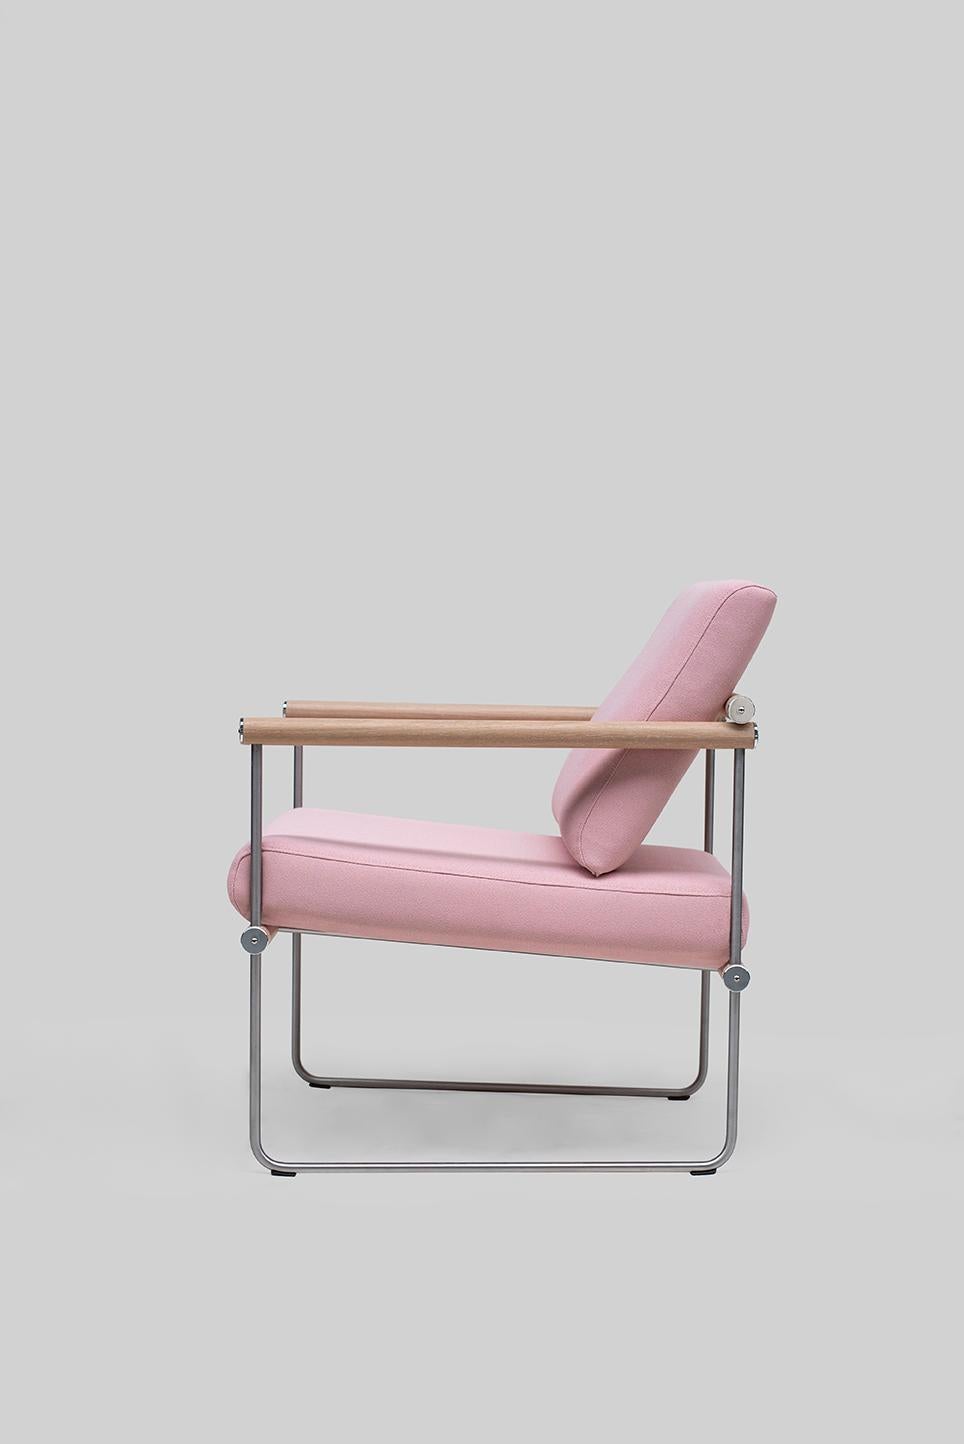 This mid-century modern 'Audrey' S12 is a comfortable armchair, designed by Peter Ghyczy in 2017 and hand-crafted in the GHCZY atelier in the South of the Netherlands. The backrest can be adjusted to the preferences of its owner. The chair’s playful